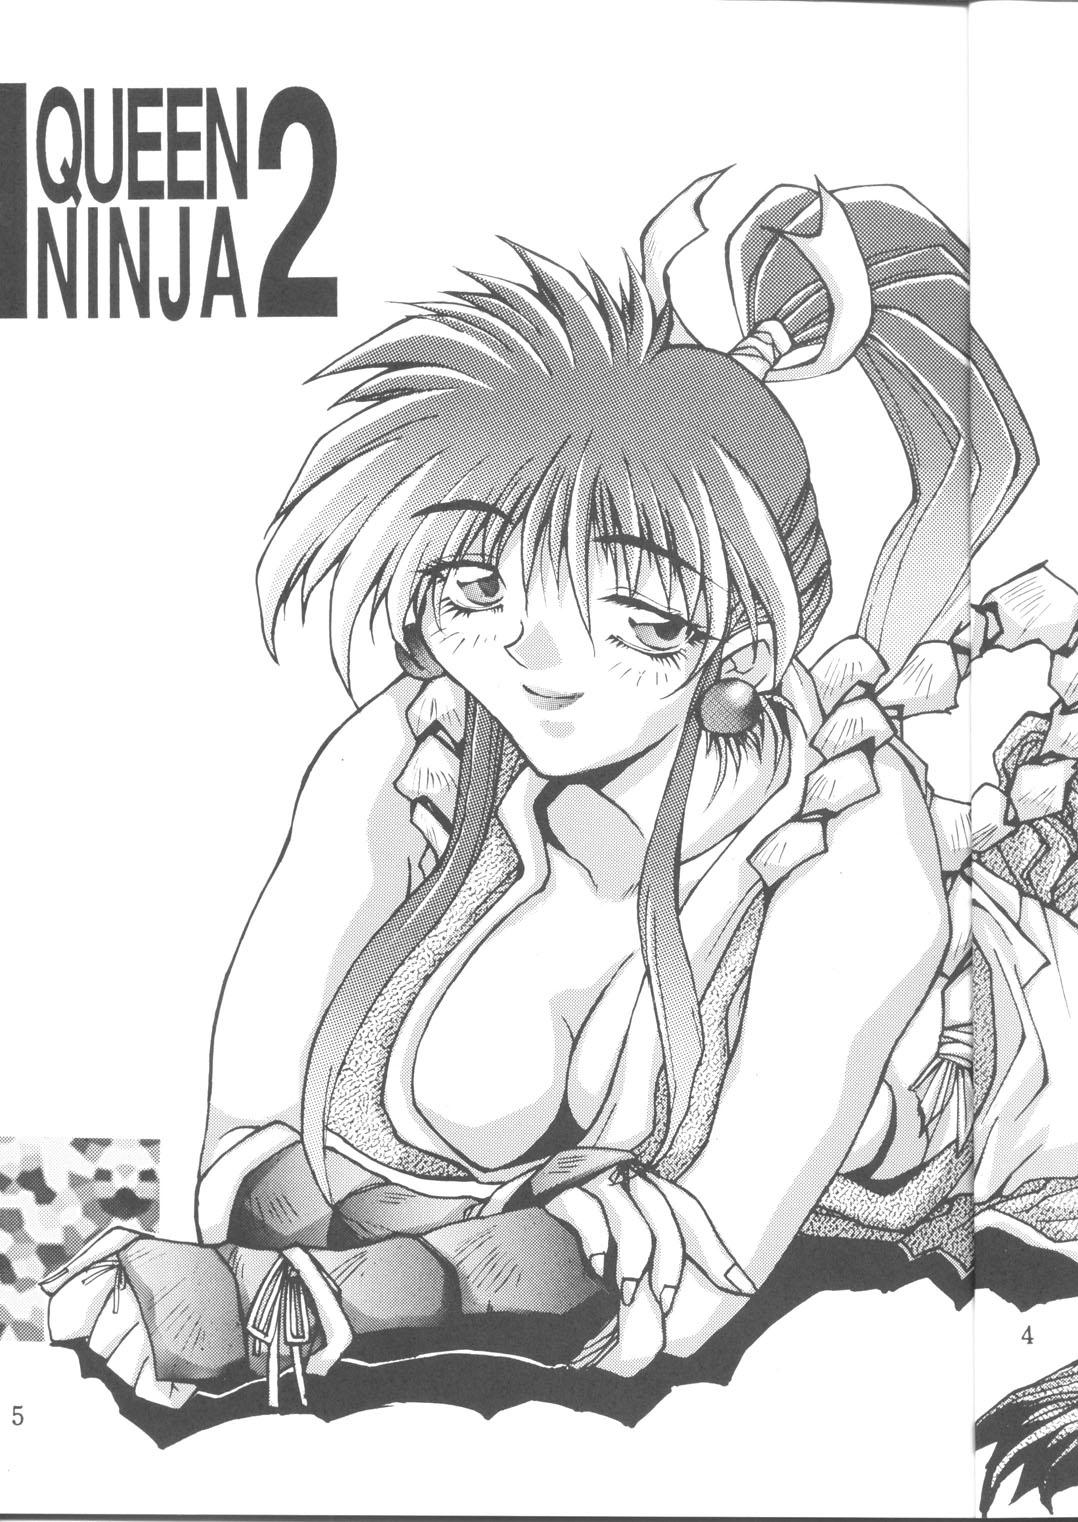 Topless Queen Ninja 2 - King of fighters Girl Fuck - Page 4